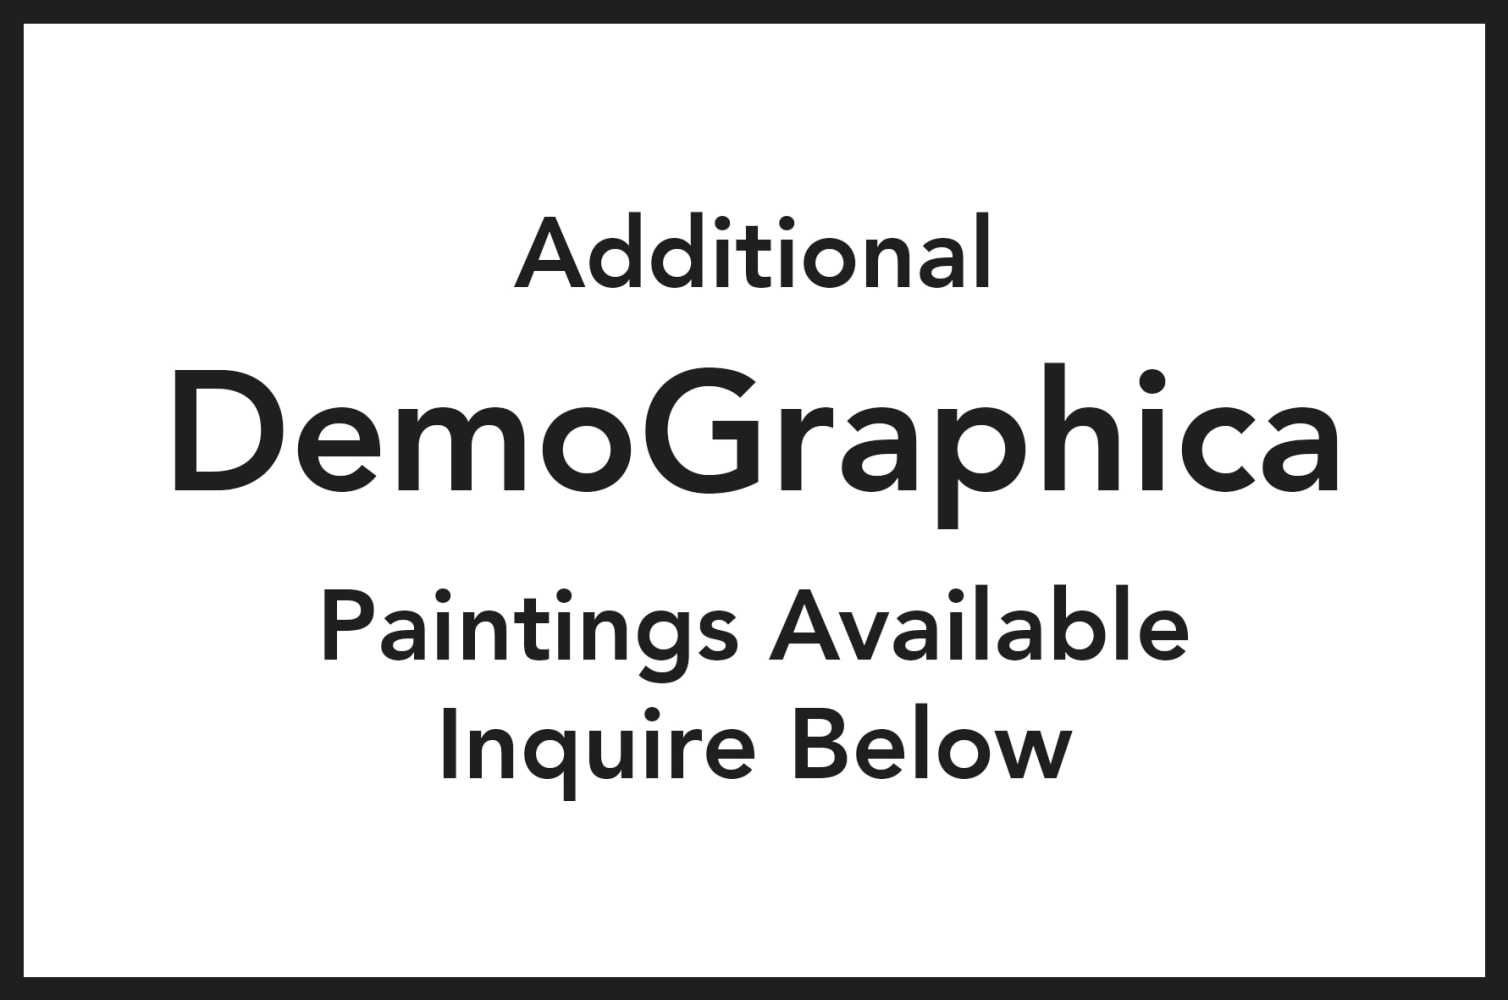 Additional DemoGraphica Paintings Available, Inquire Below